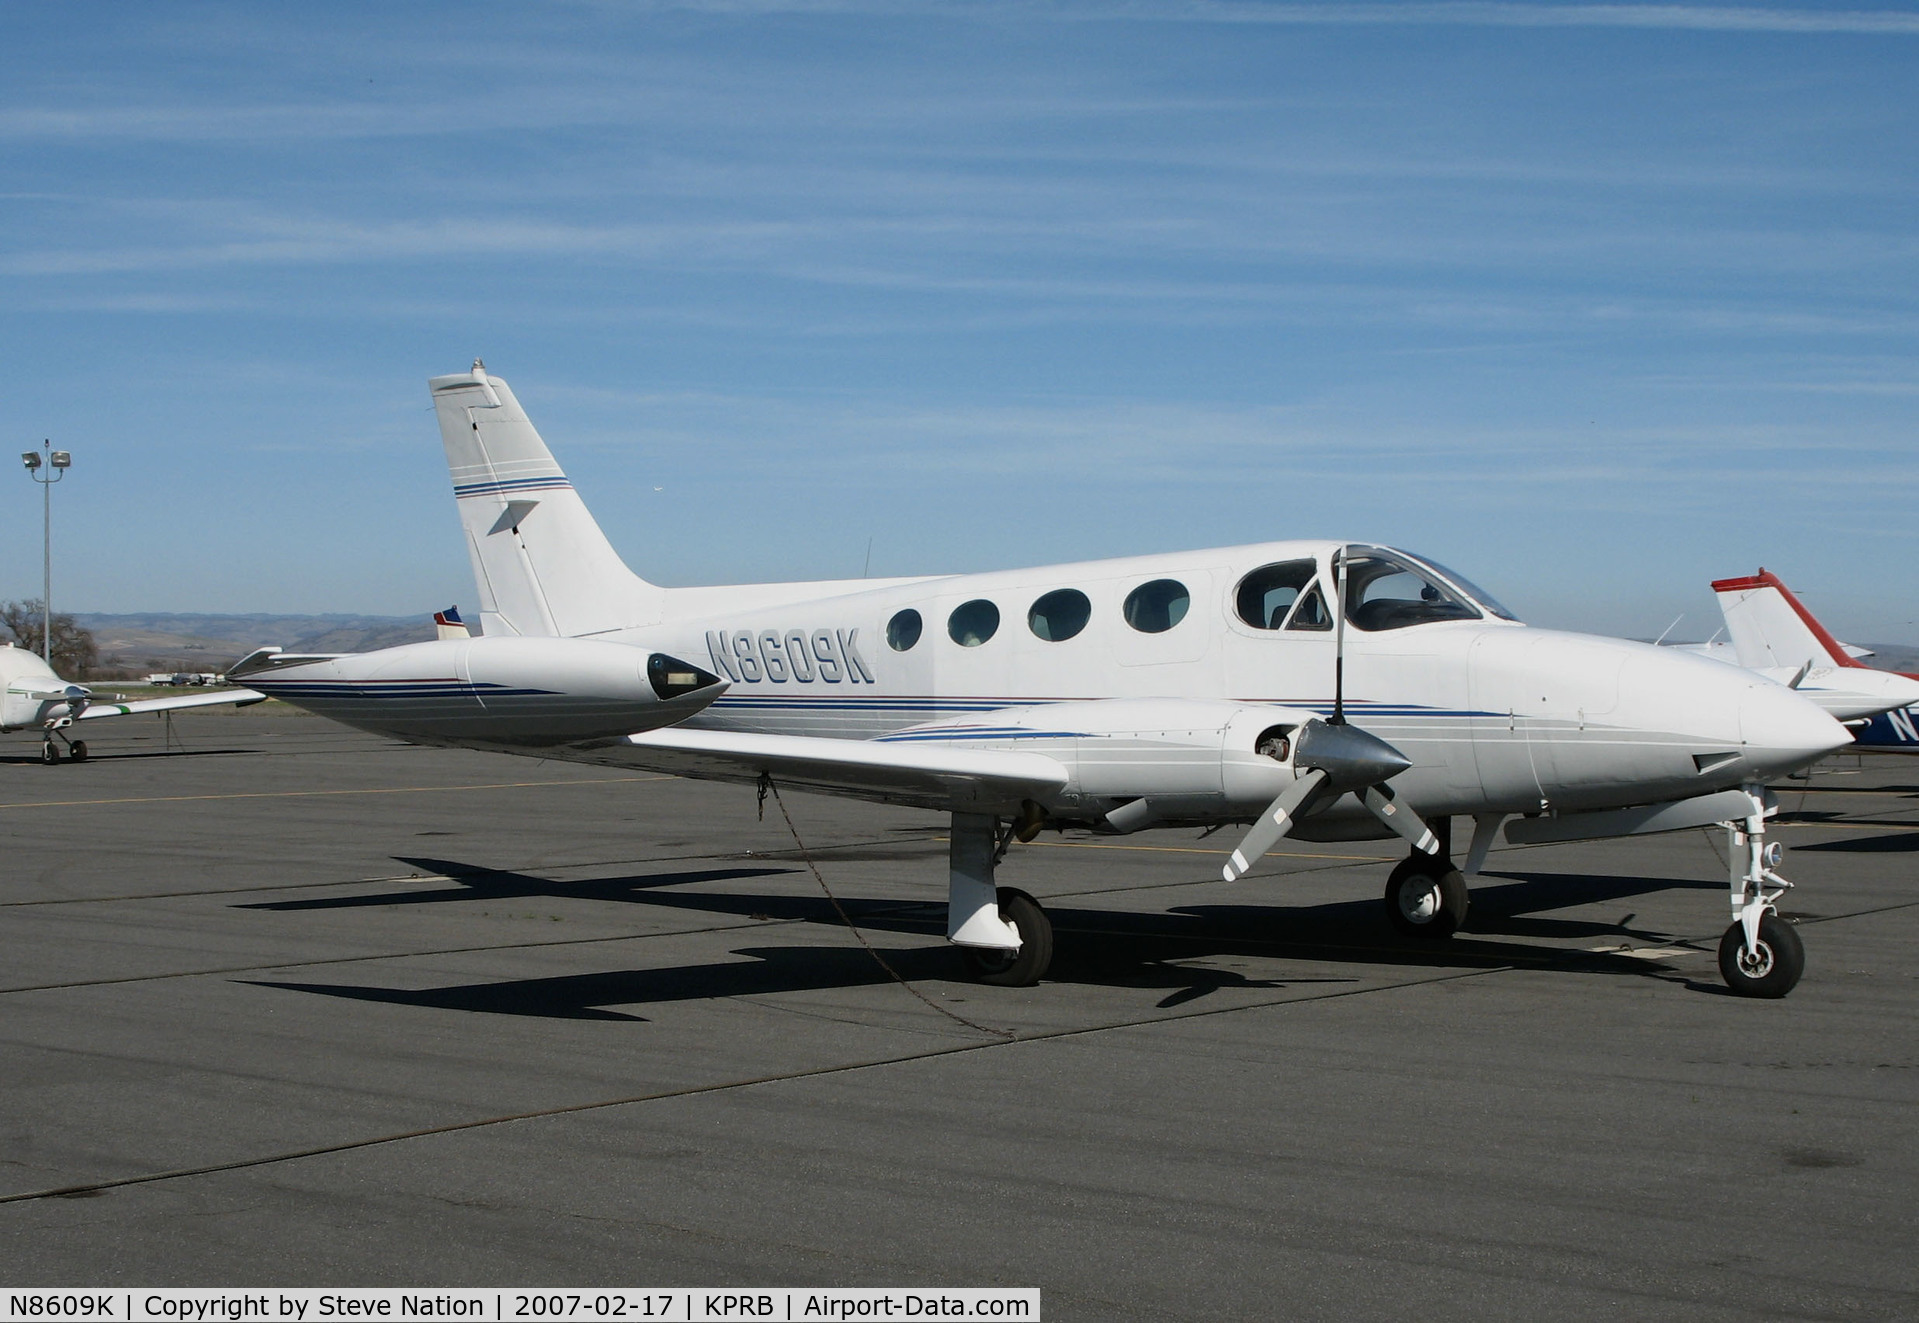 N8609K, 1978 Cessna 340A C/N 340A0558, Southern California-based 1978 Cessna 340A @ Paso Robles Municipal Airport, CA